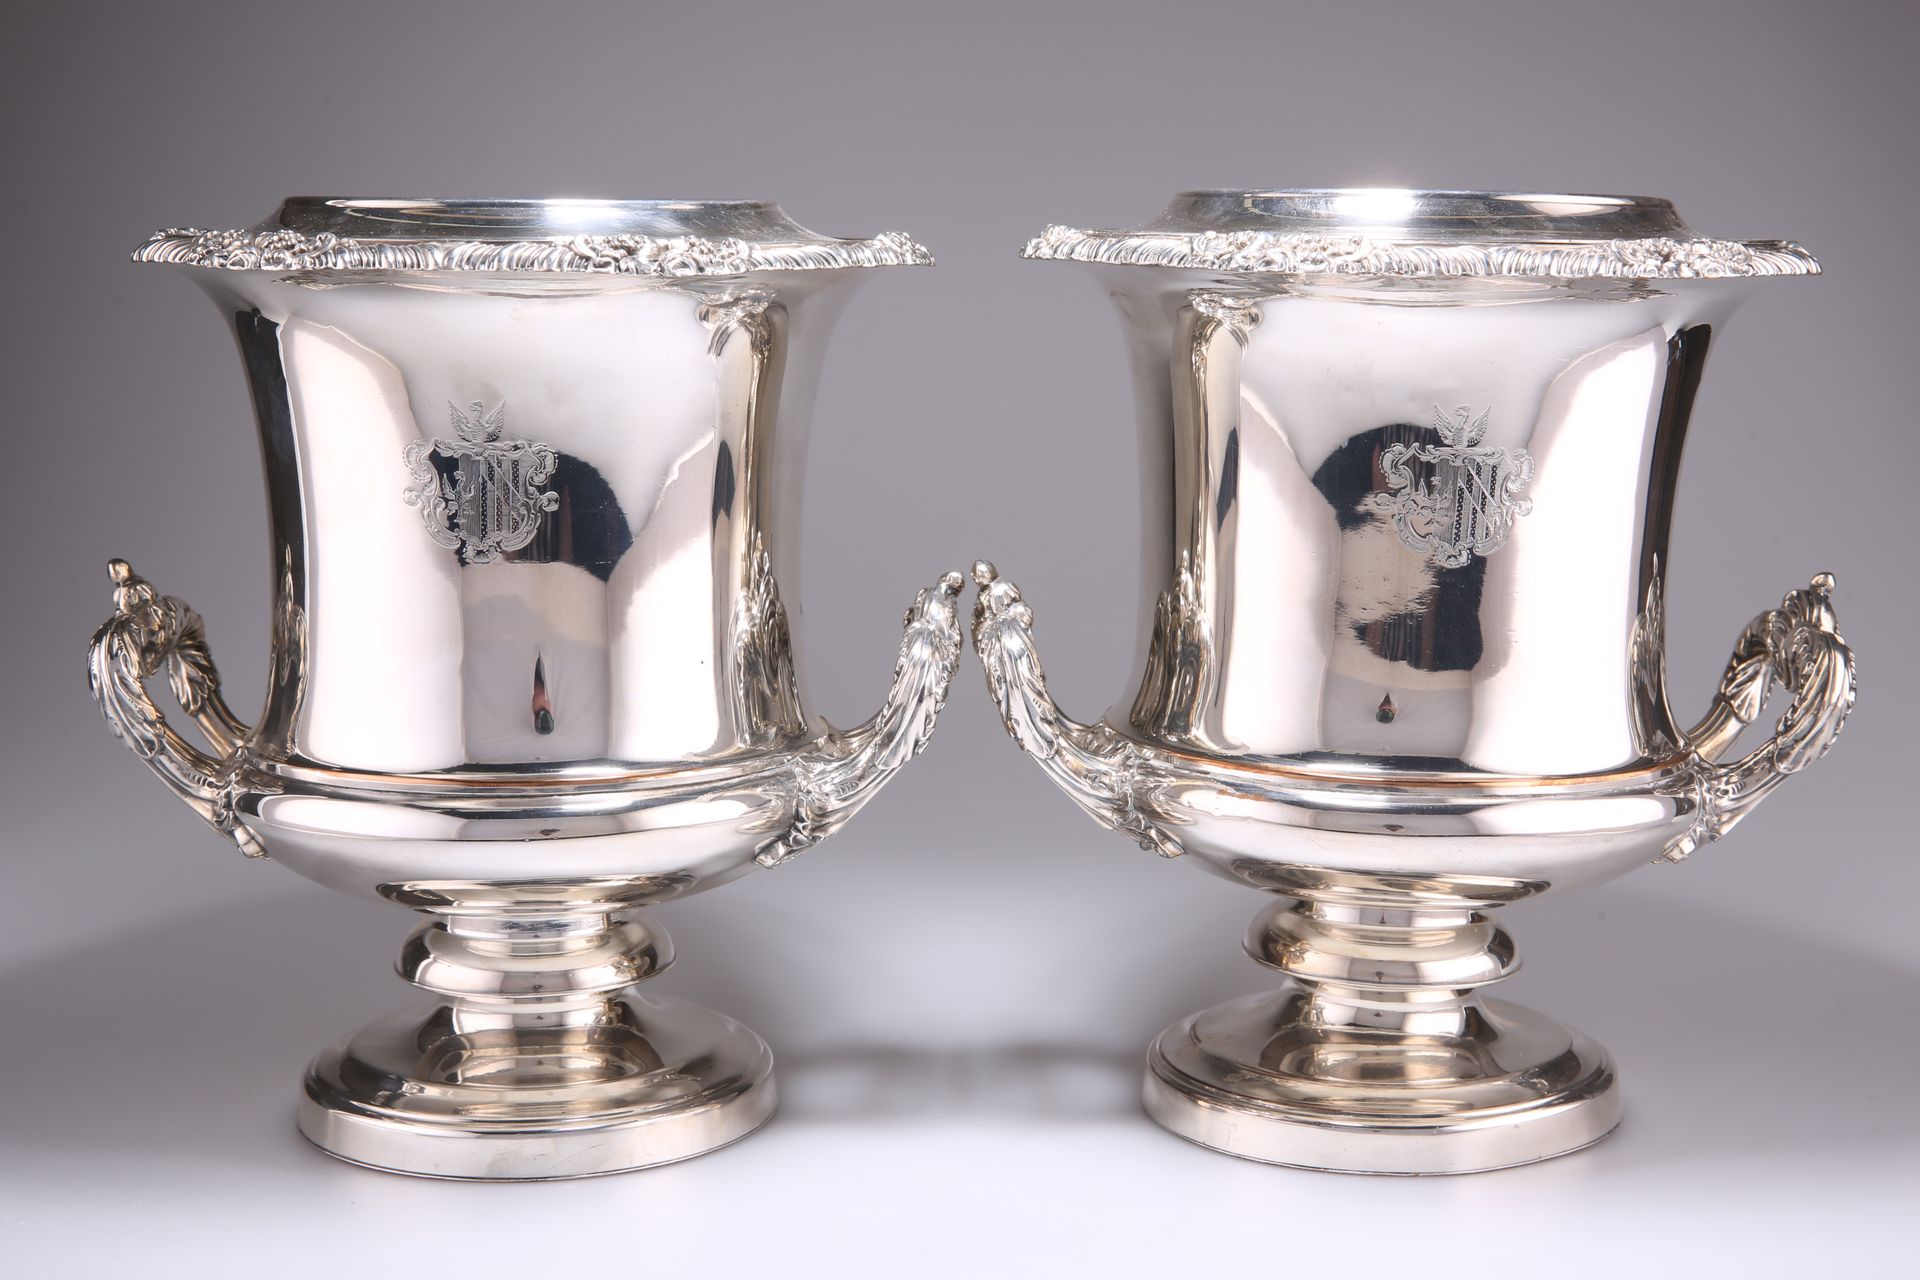 Null A PAIR OF OLD SHEFFIELD PLATE WINE COOLERS, CIRCA 1820, by Matthew Boulton,&hellip;